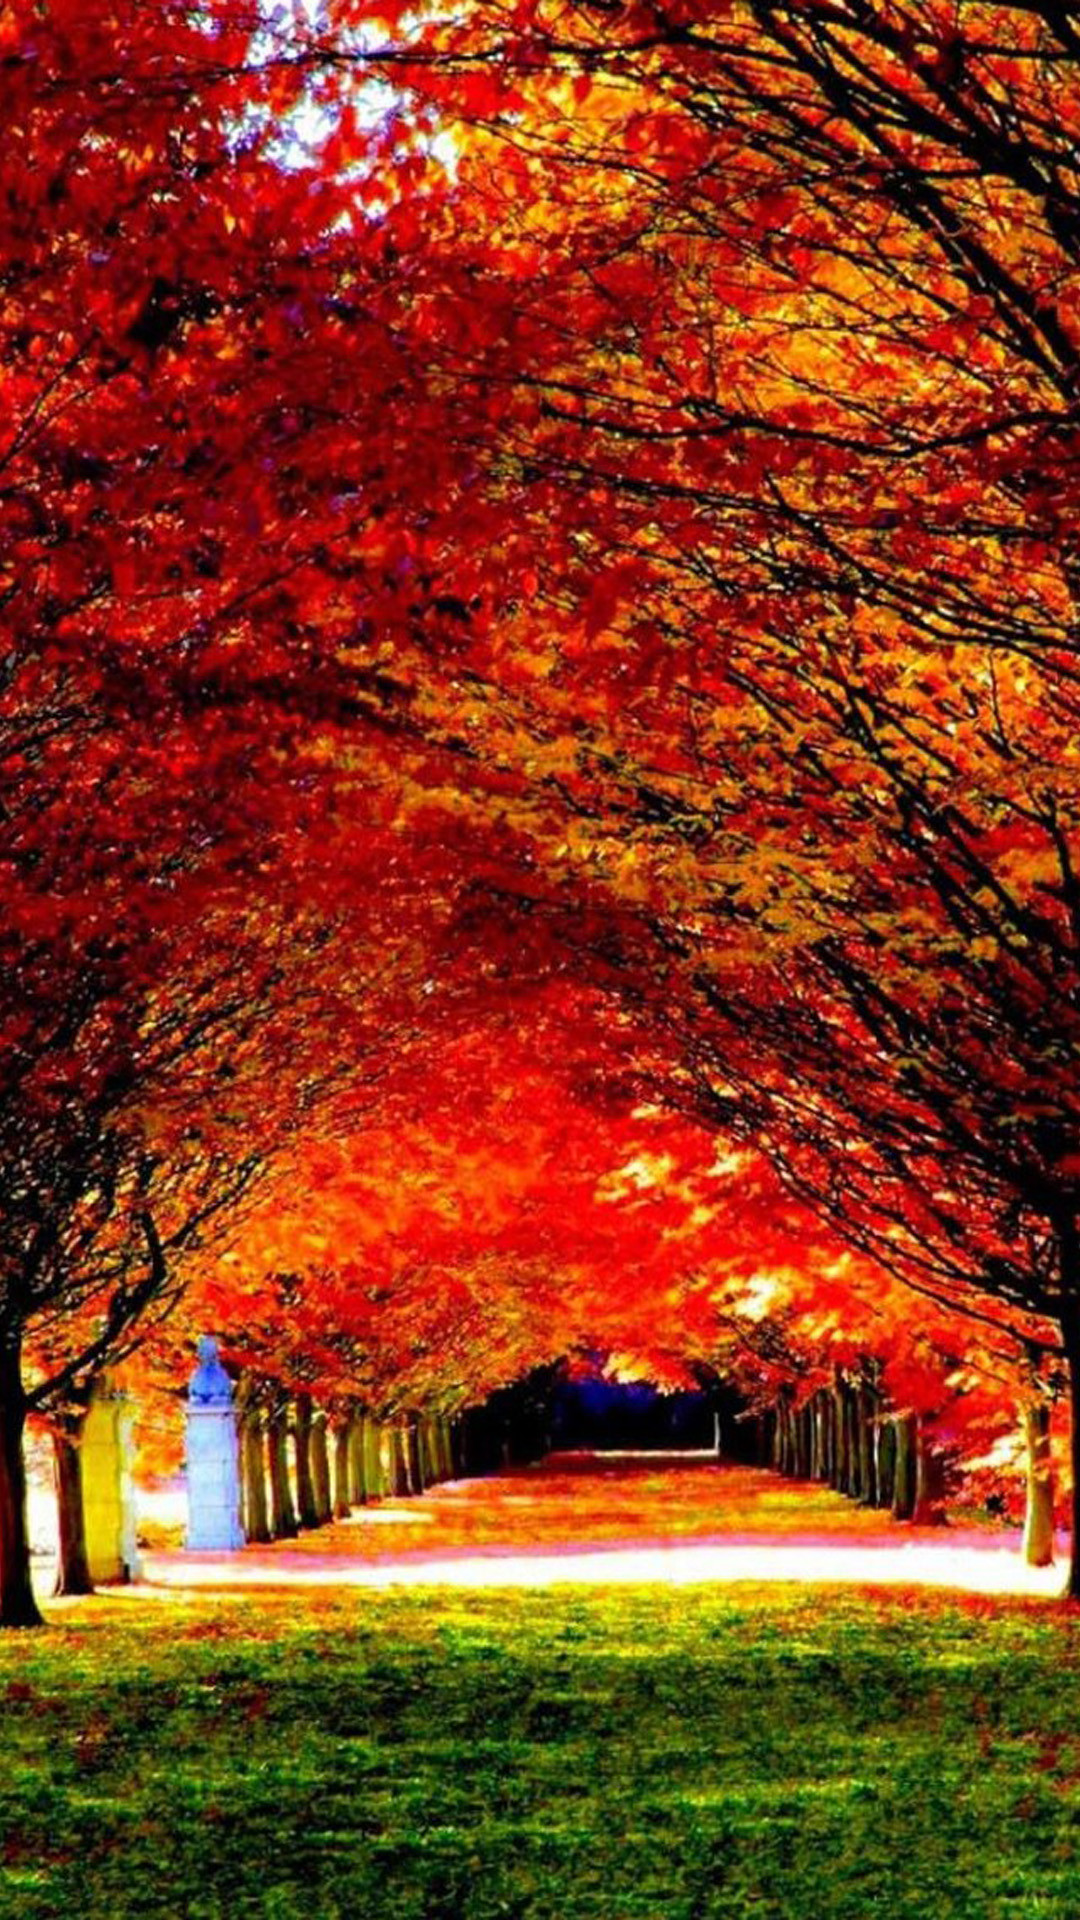 Nature Red Trees Road Iphone 6 Wallpaper Download Iphone Wallpapers Ipad Wallpapers One Stop Download Iphone13 スマホ壁紙 待受画像ギャラリー